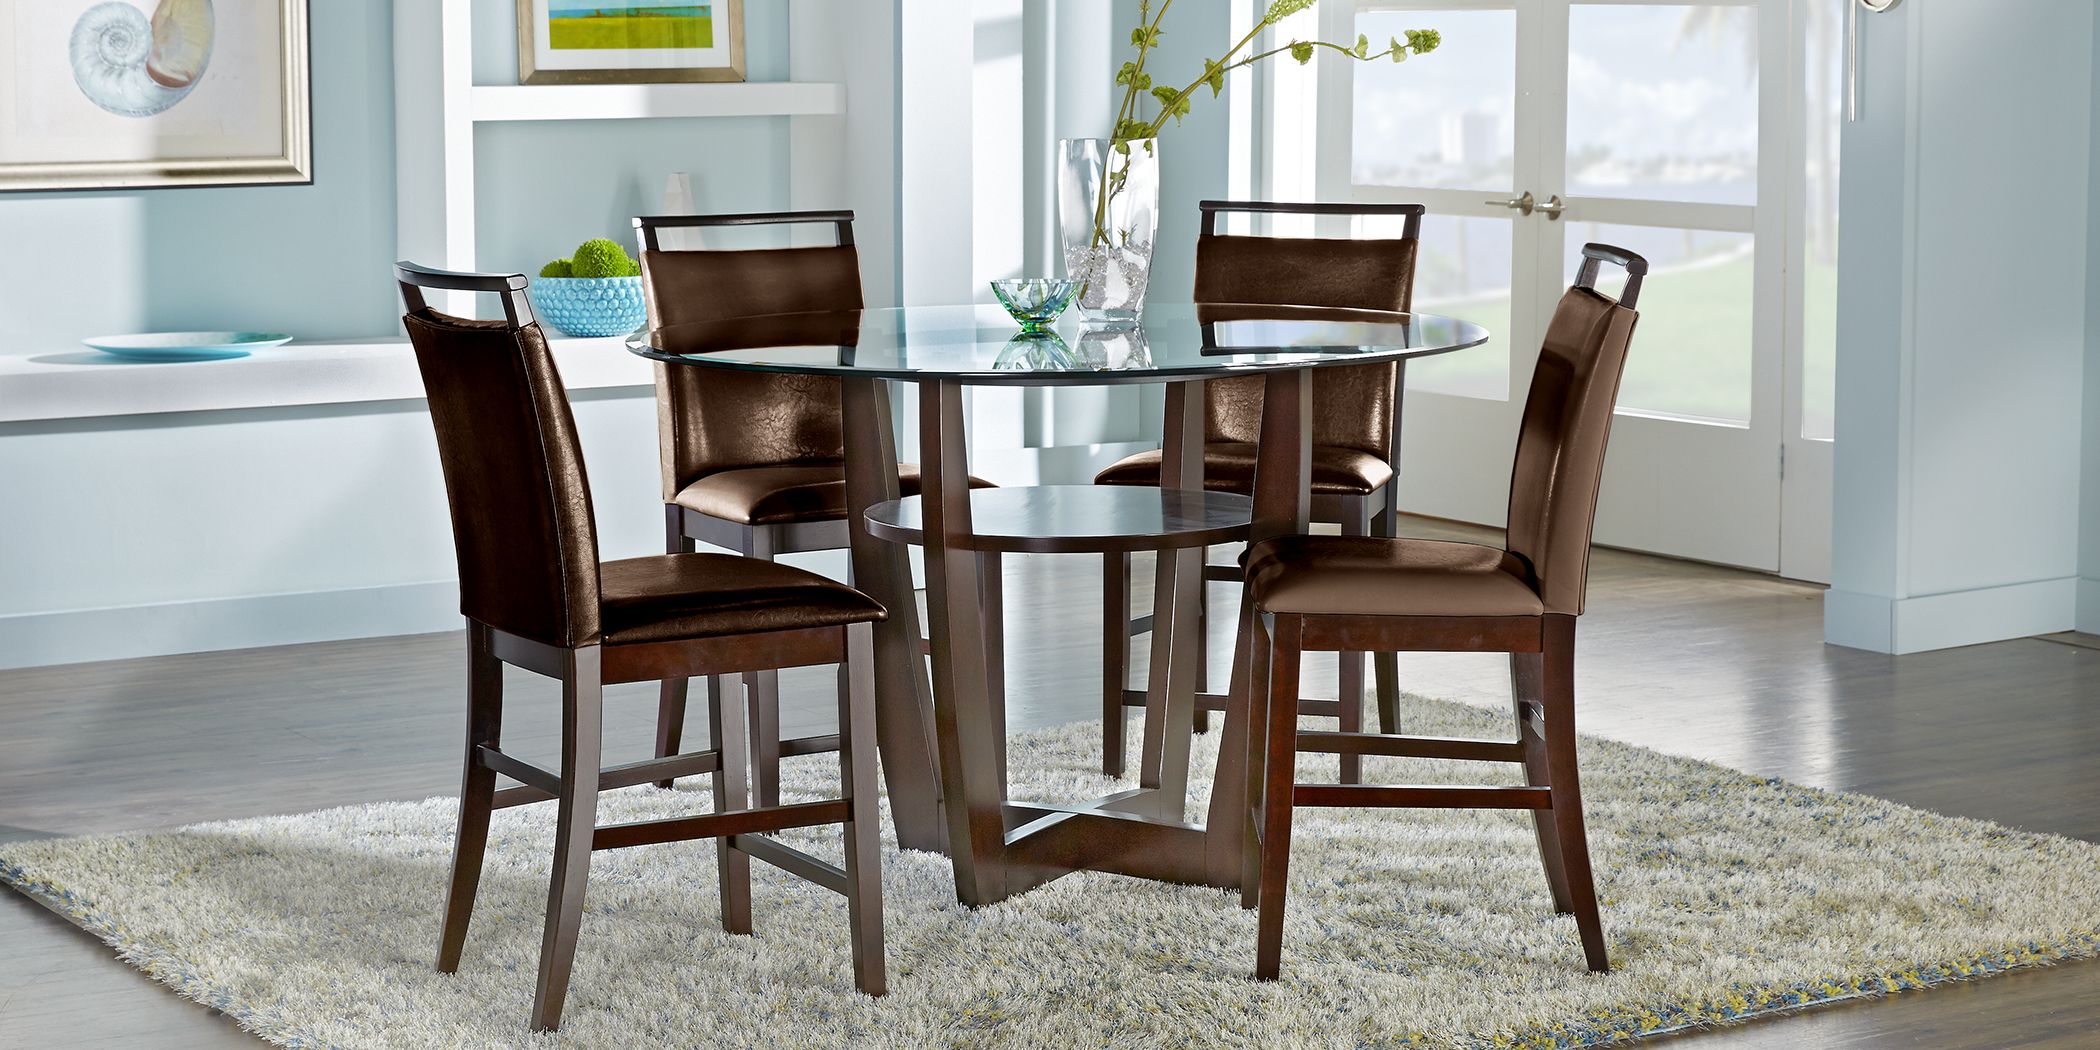 5-Piece Set MTFY 5-Piece Kitchen Dining Table Set,Dining Table Set w/Glass Table Top,4 Leather PaddedChairs,Metal Frame Table for Breakfast Dining Room Kitchen Furniture